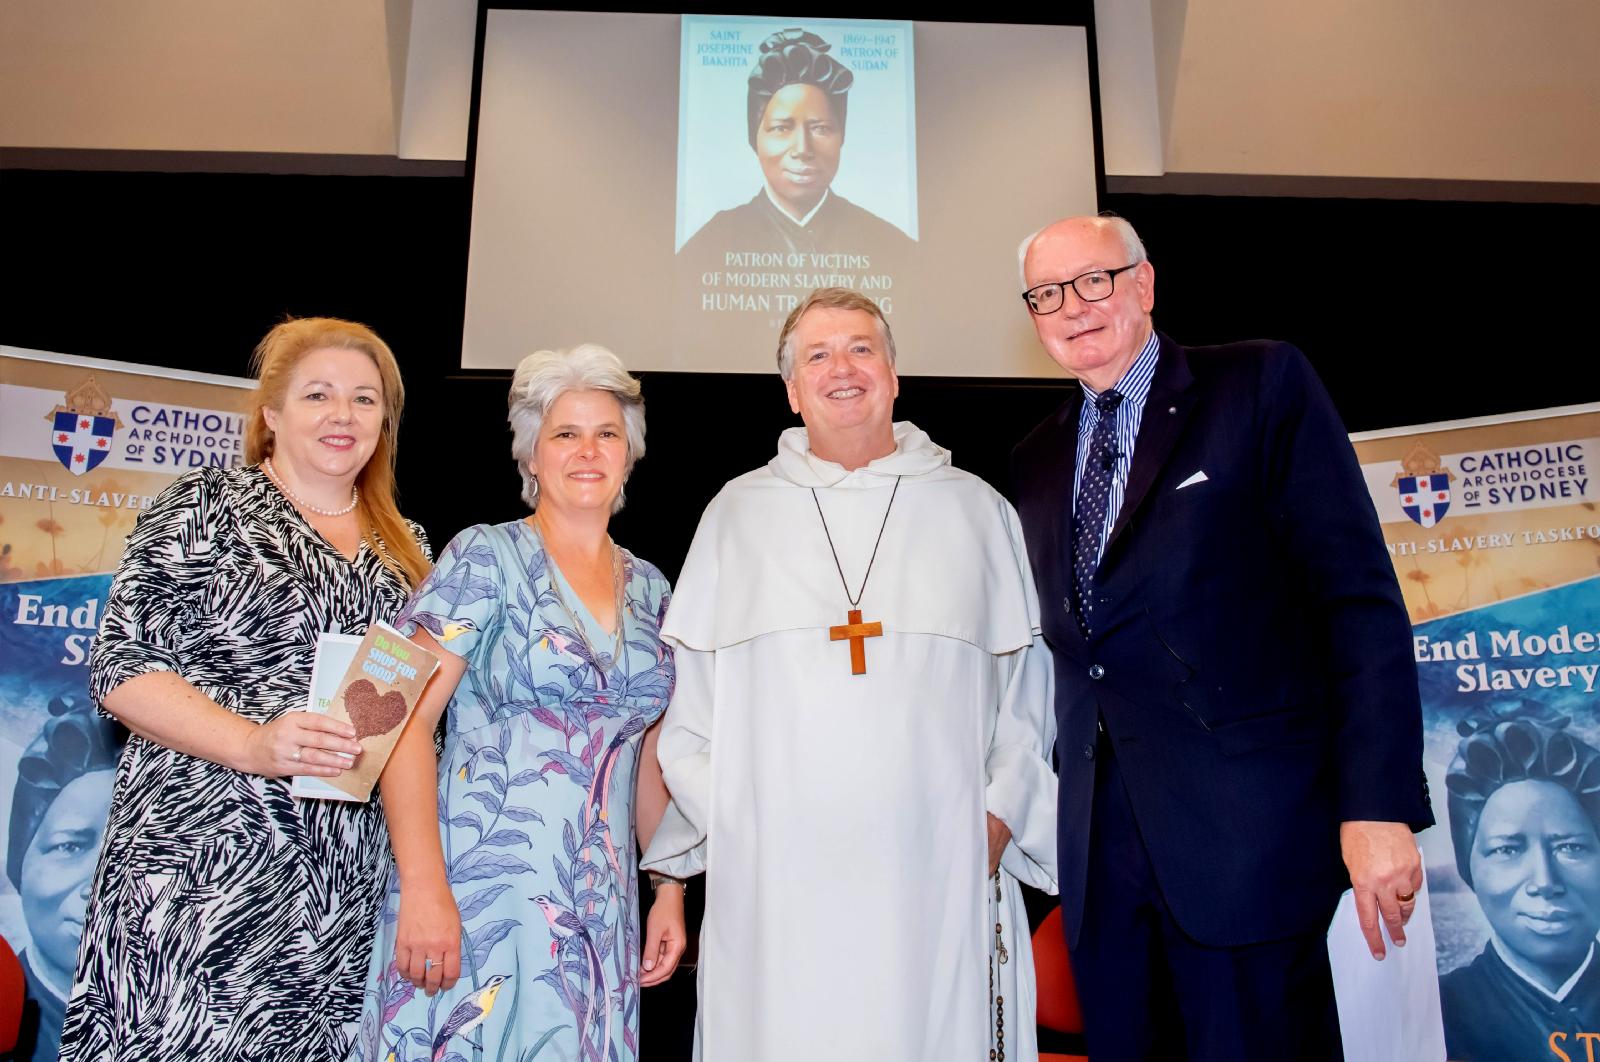 Catholic Anti-Slavery Network in Australia becomes model for business